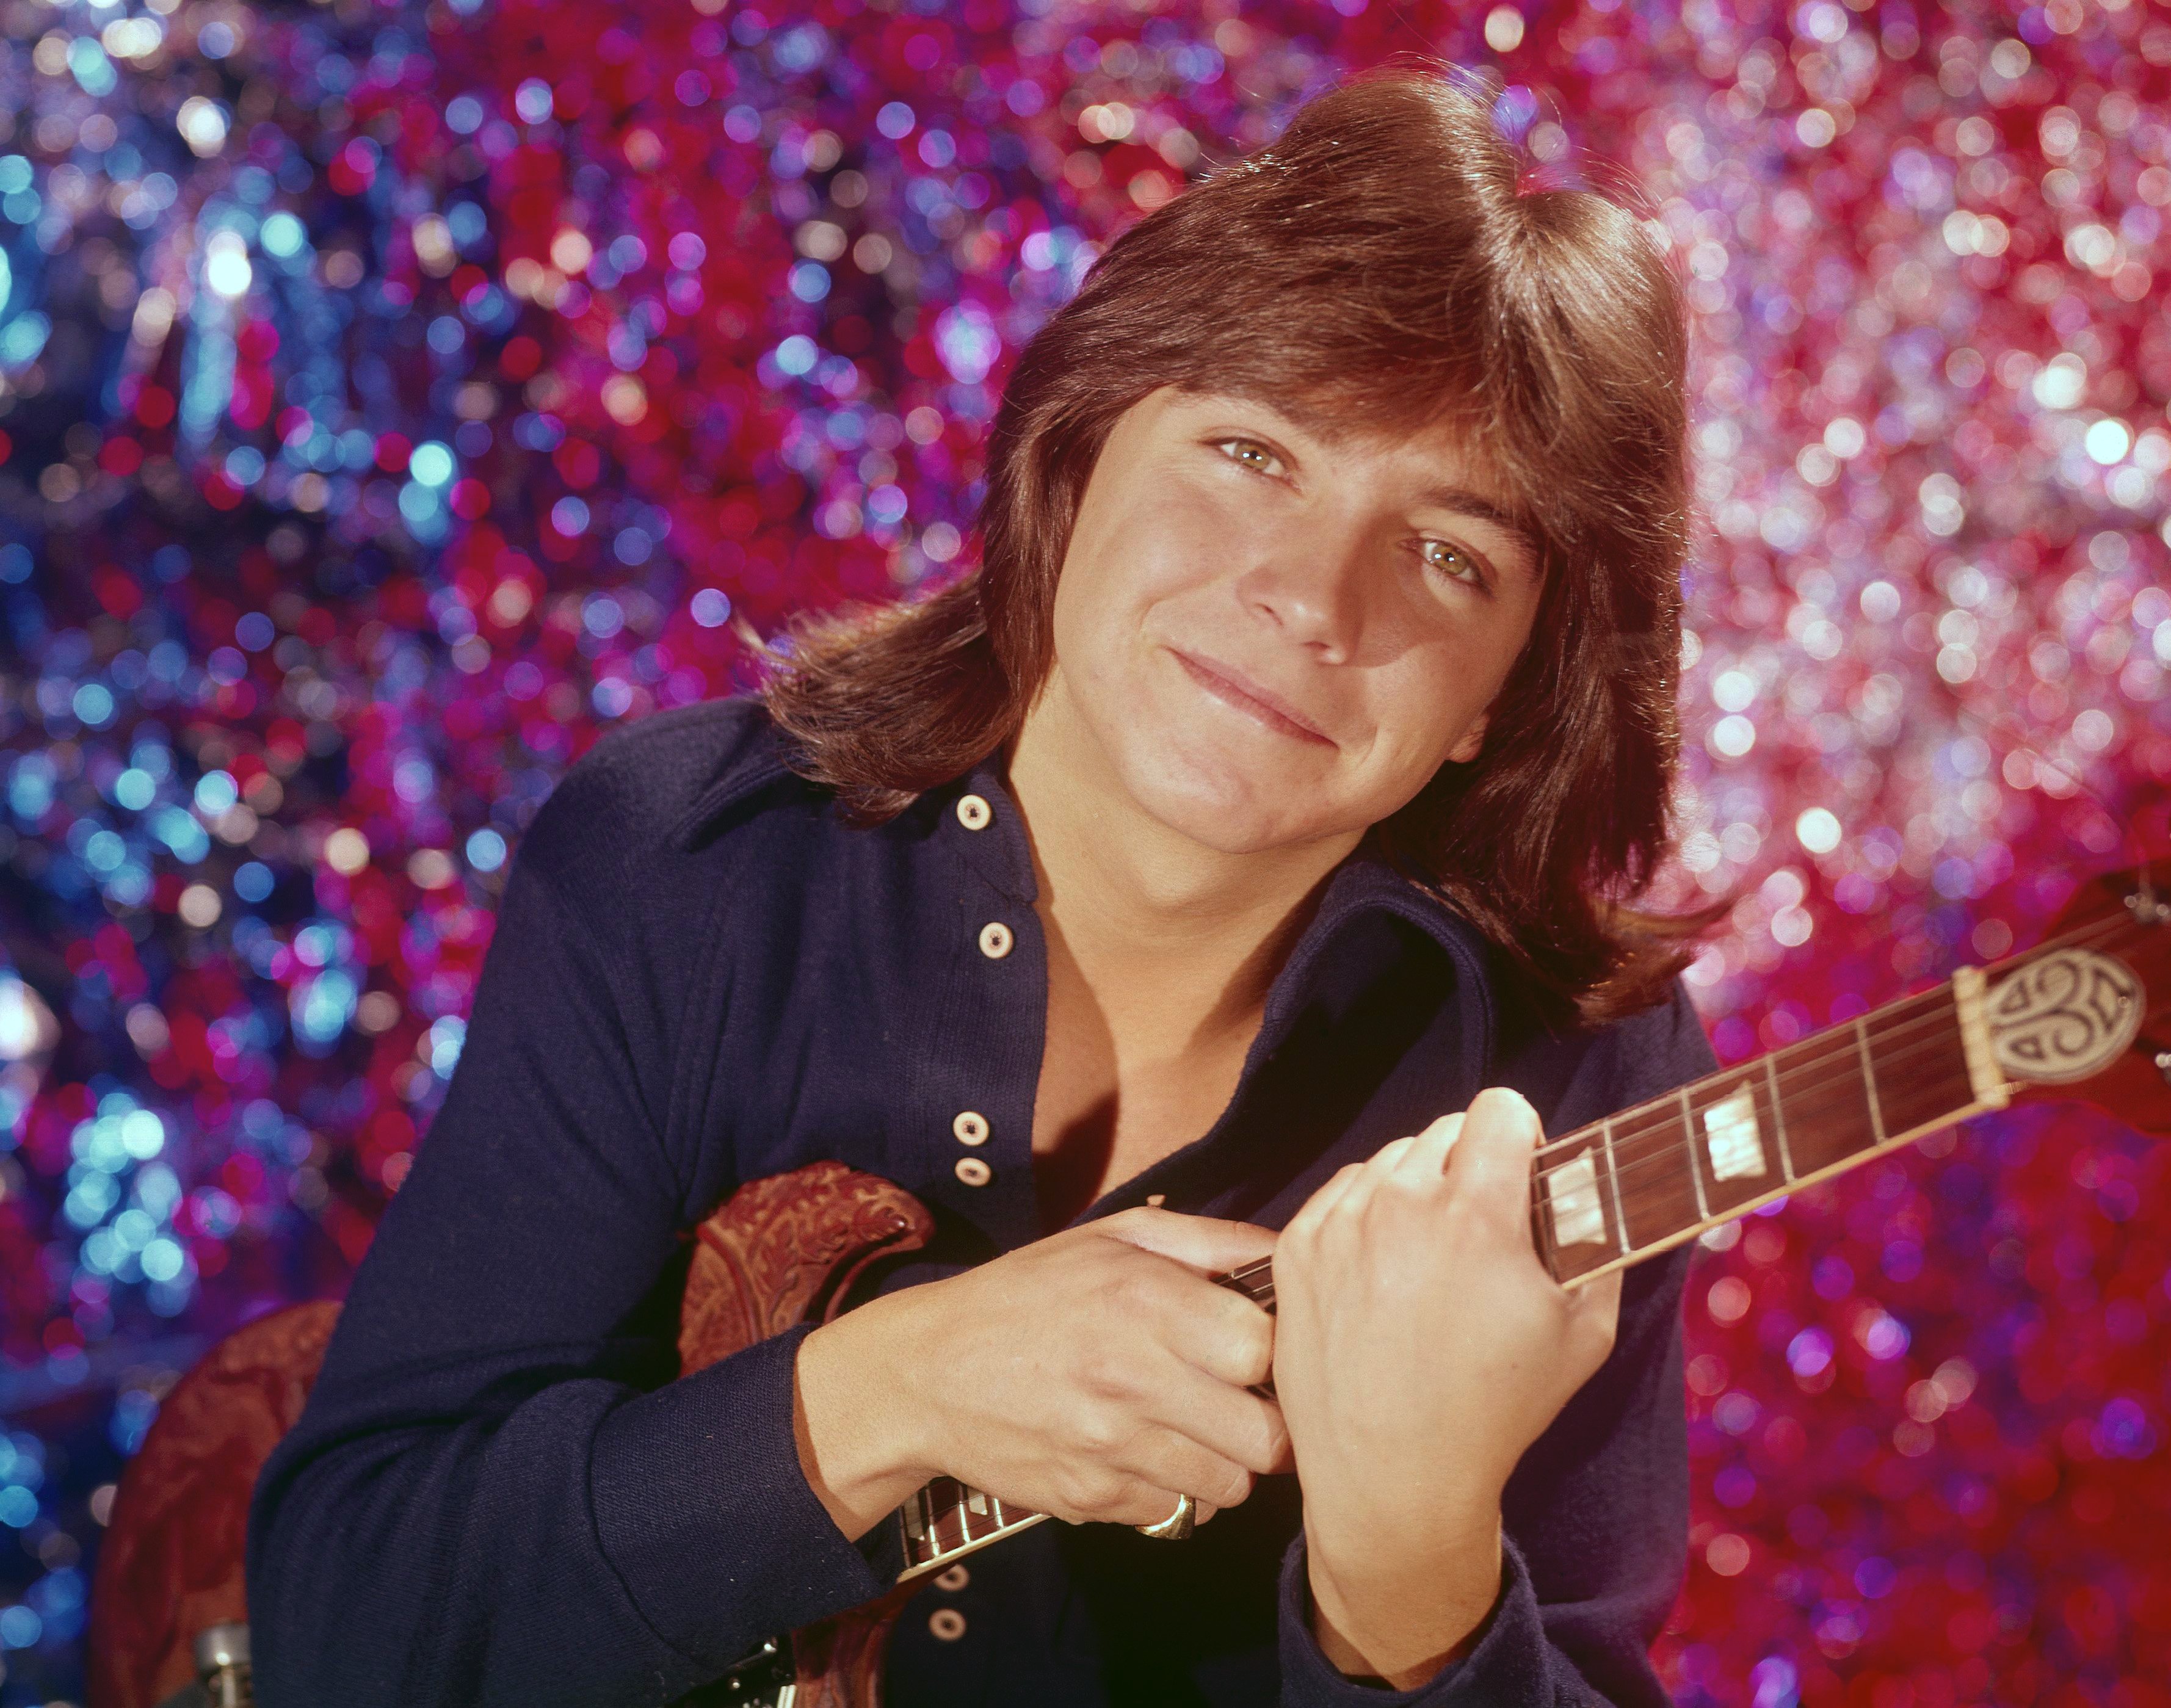 David Cassidy on "The Partridge Family" in 1971  | Source: Getty Images